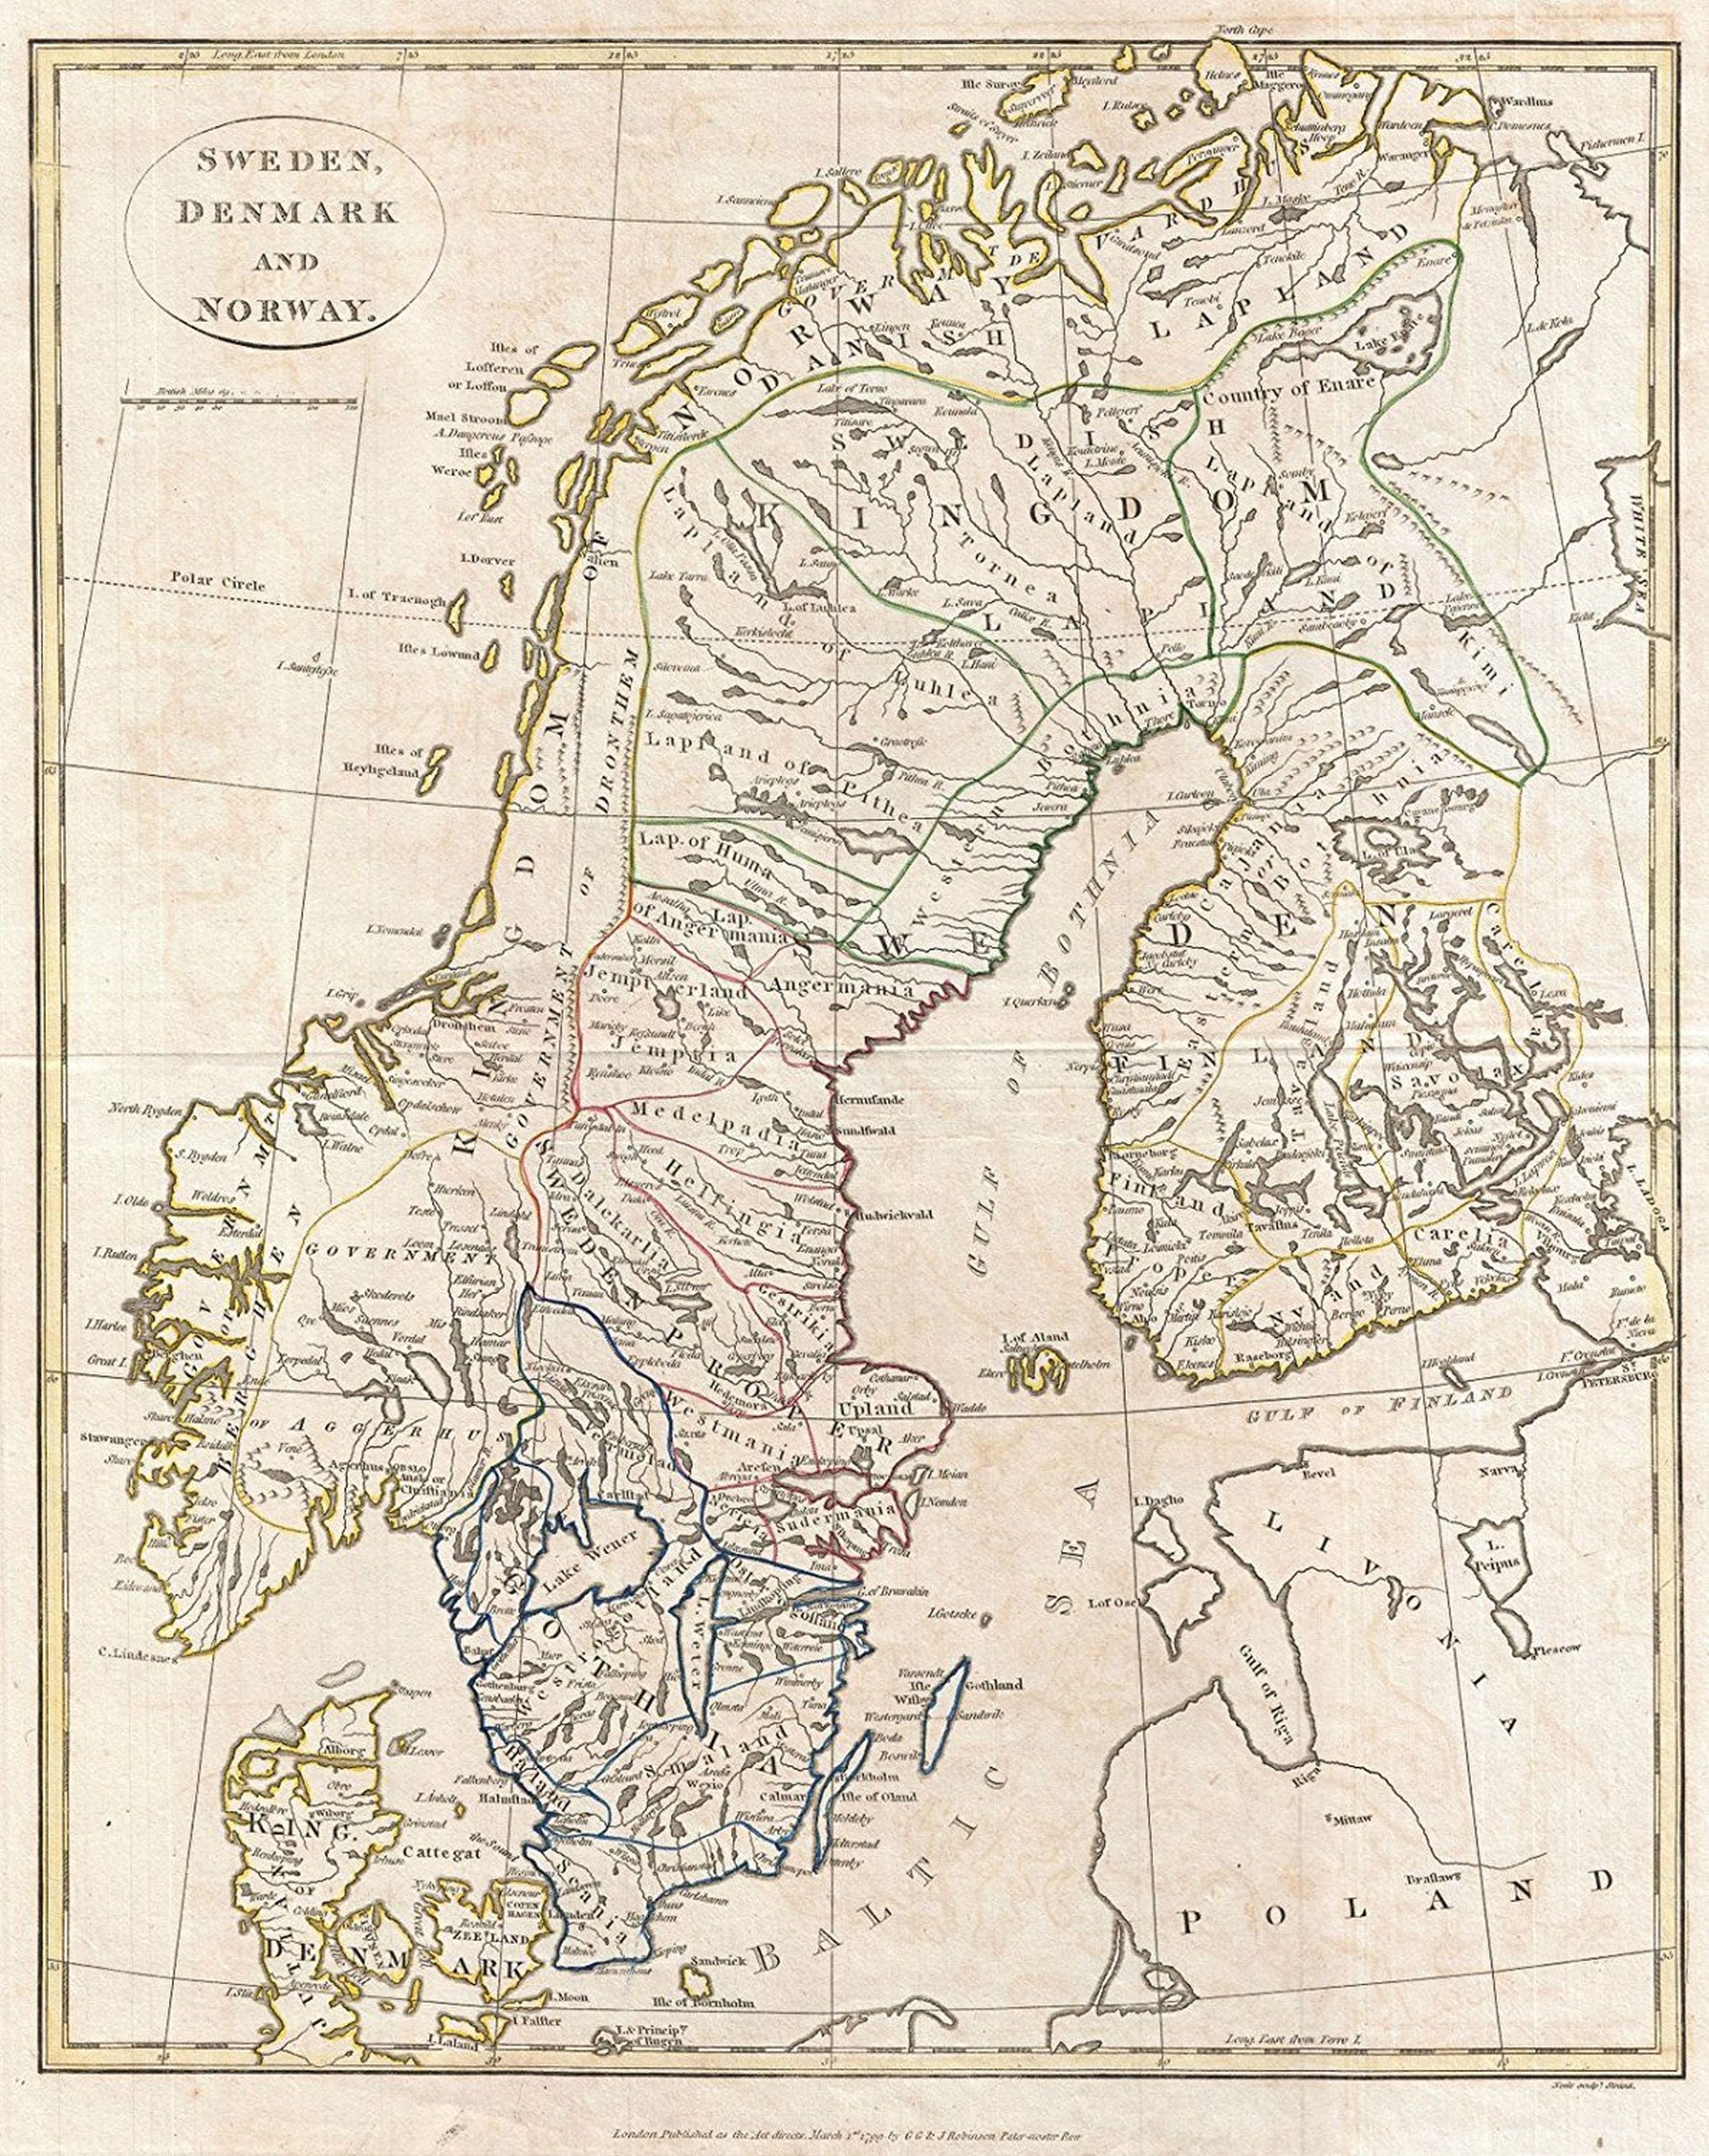 A fine 1799 map of Sweden, Denmark and Norway by the English map publisher Clement Cruttwell. Map includes the Kingdom of Norway, Denmark, Sweden, and Finland. Includes the 25 provinces of Sweden, which have no administrative function, but remain, histor